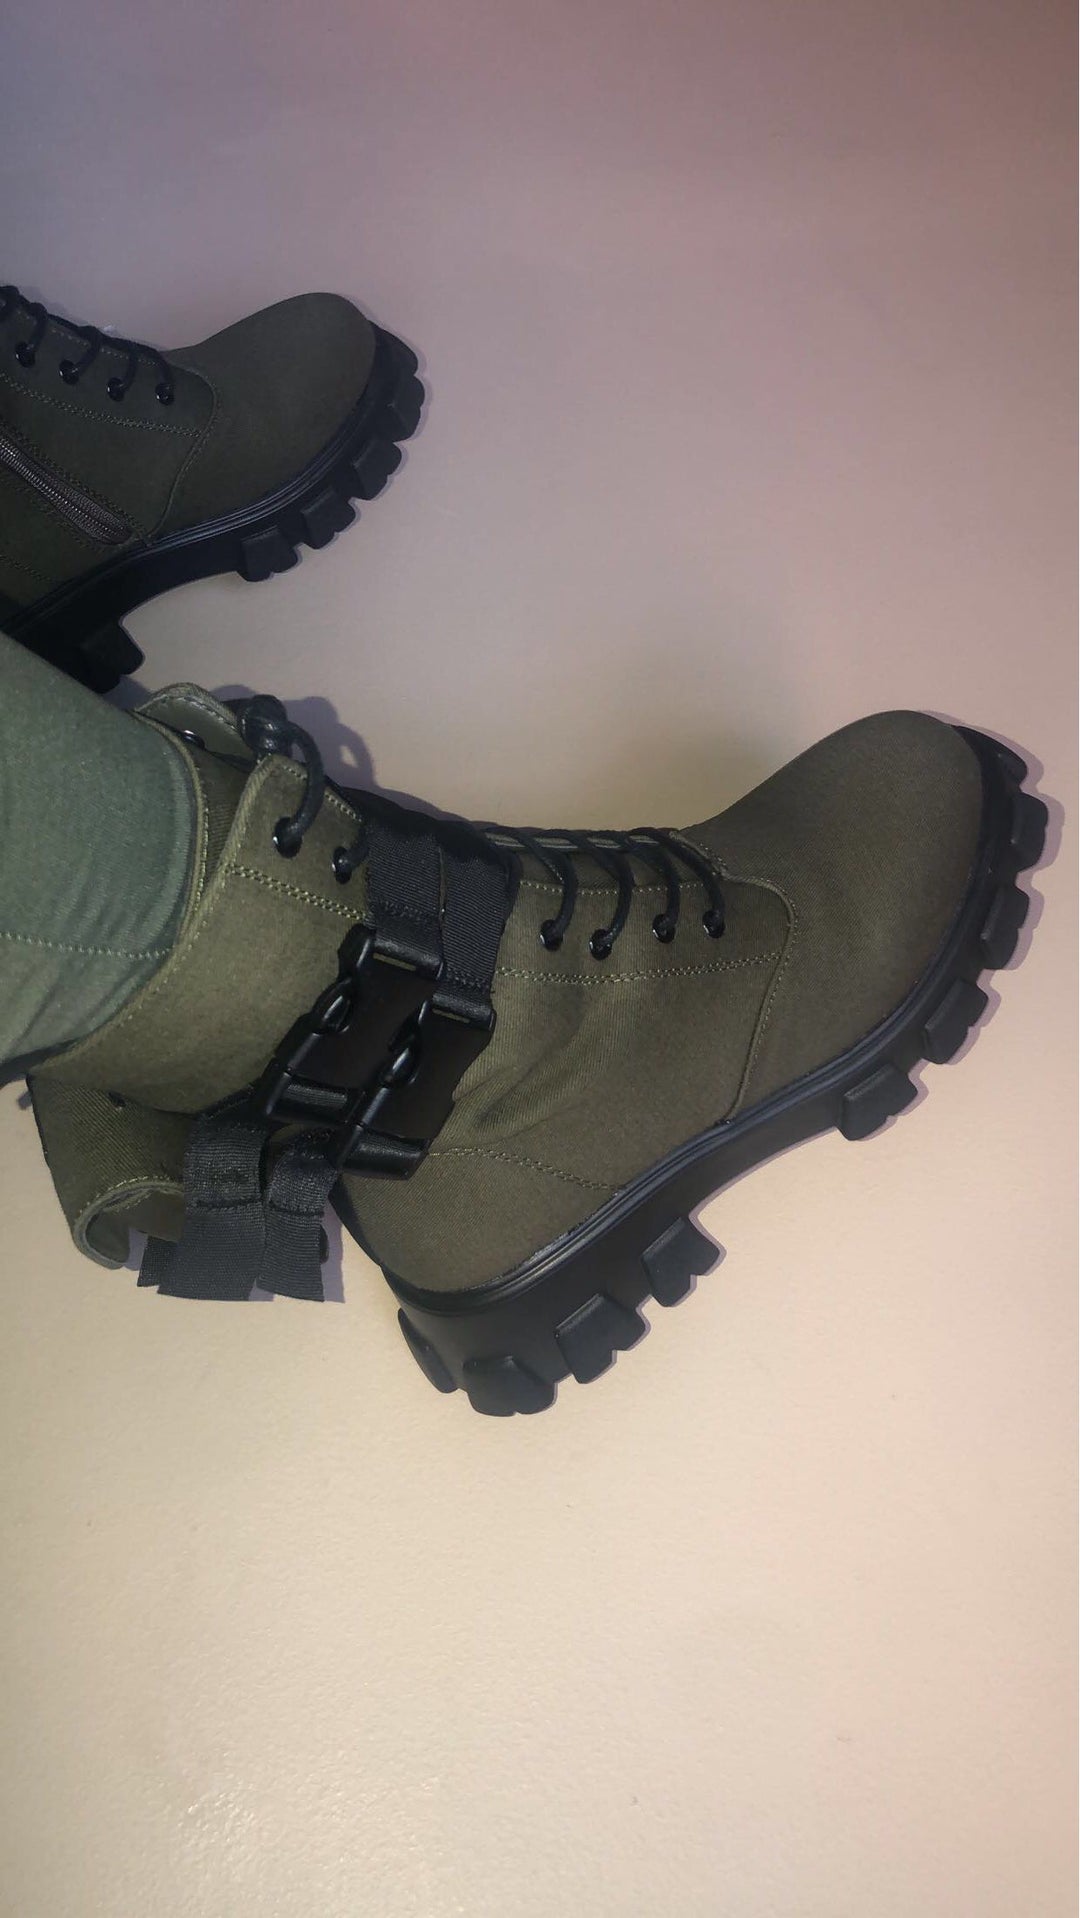 The Remy Military Boots - Rehabcouture